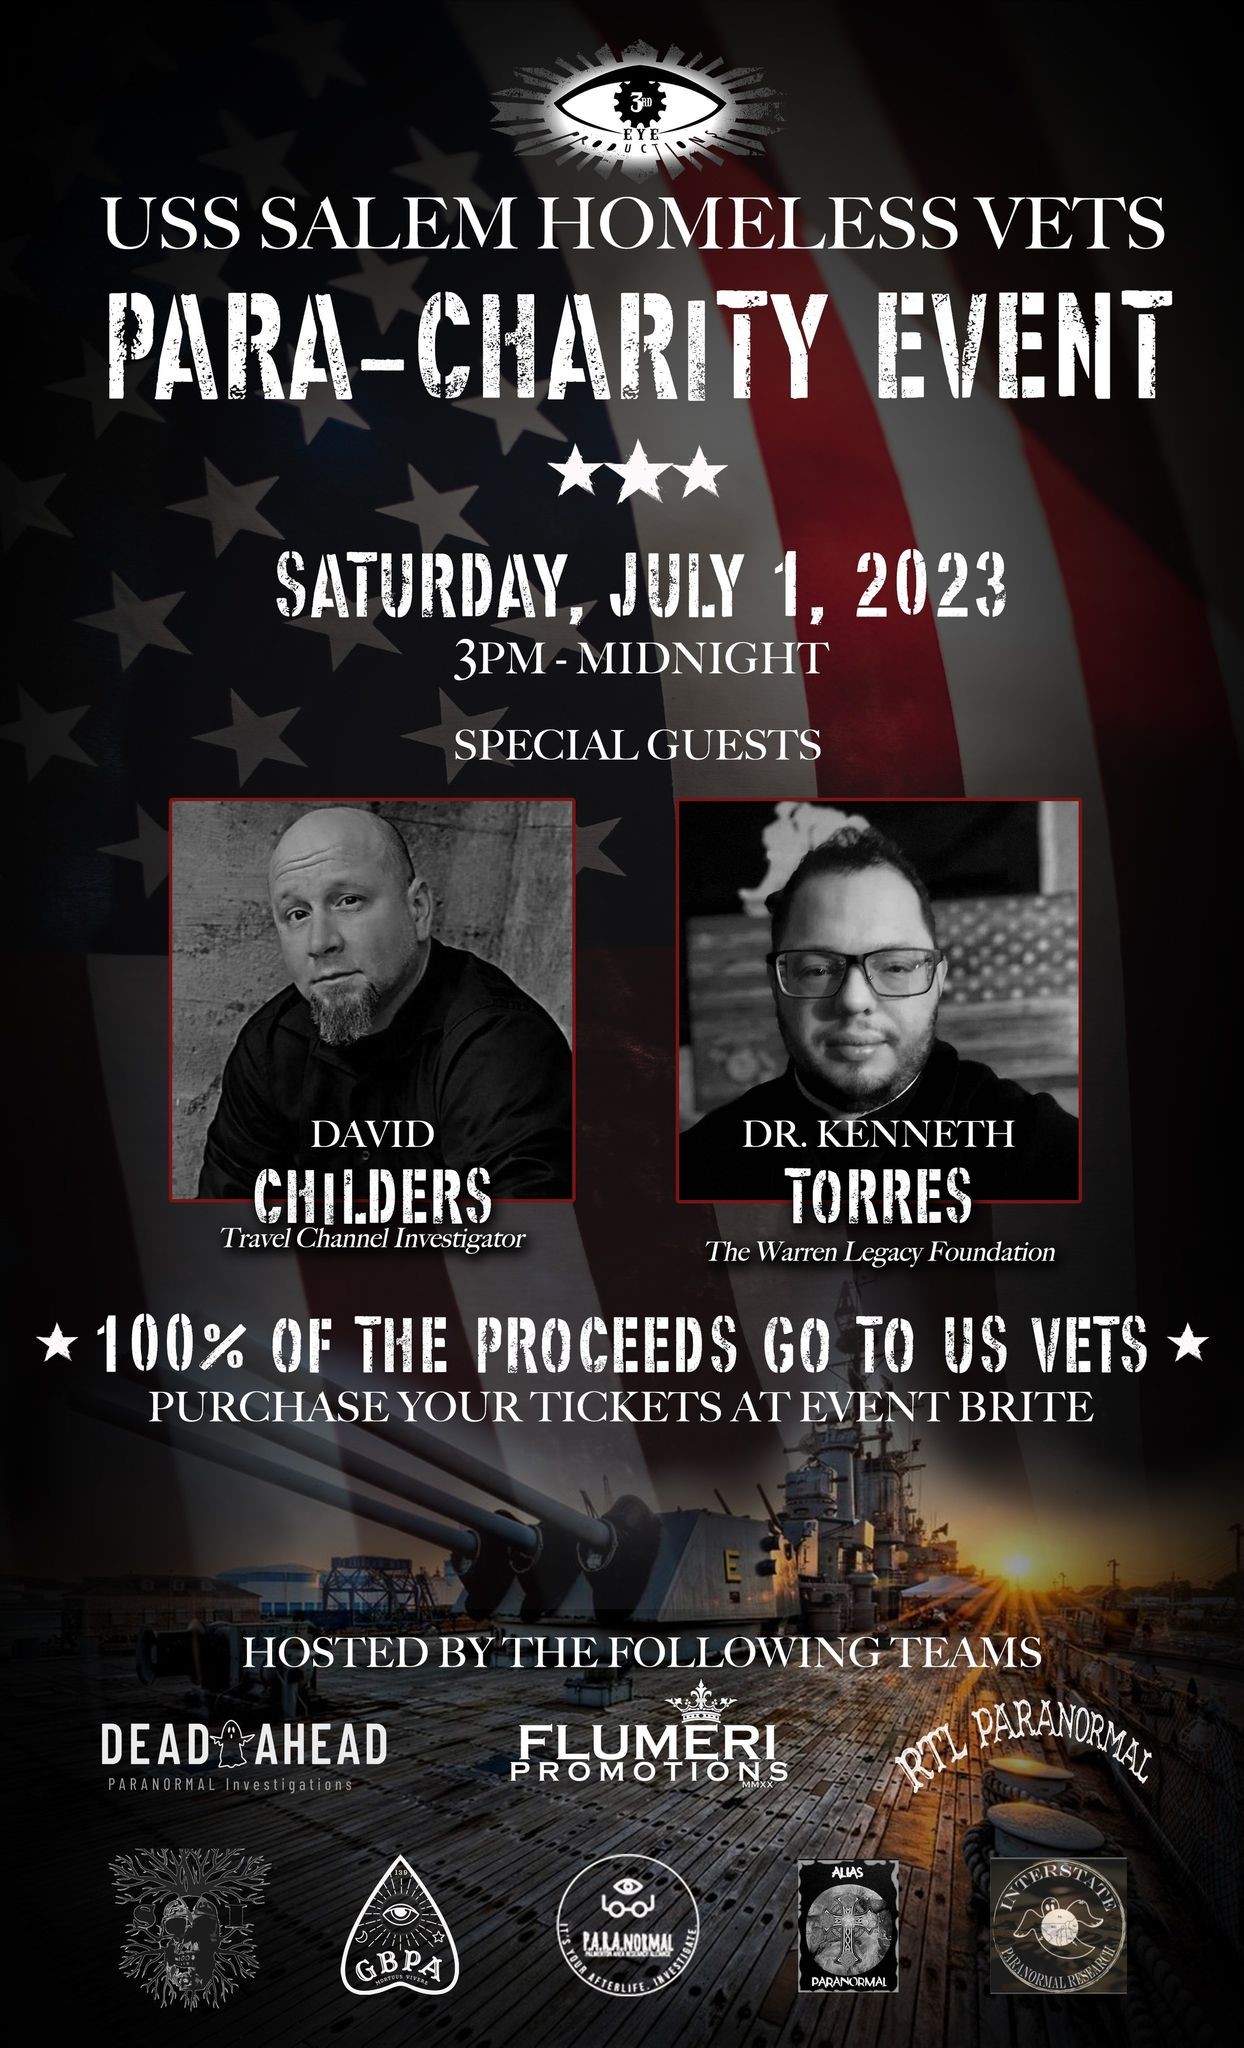 Homeless Veterans Para-Charity at the USS Salem  on Jul 01, 15:00@USS Salem - Buy tickets and Get information on Thriller Events thriller.events